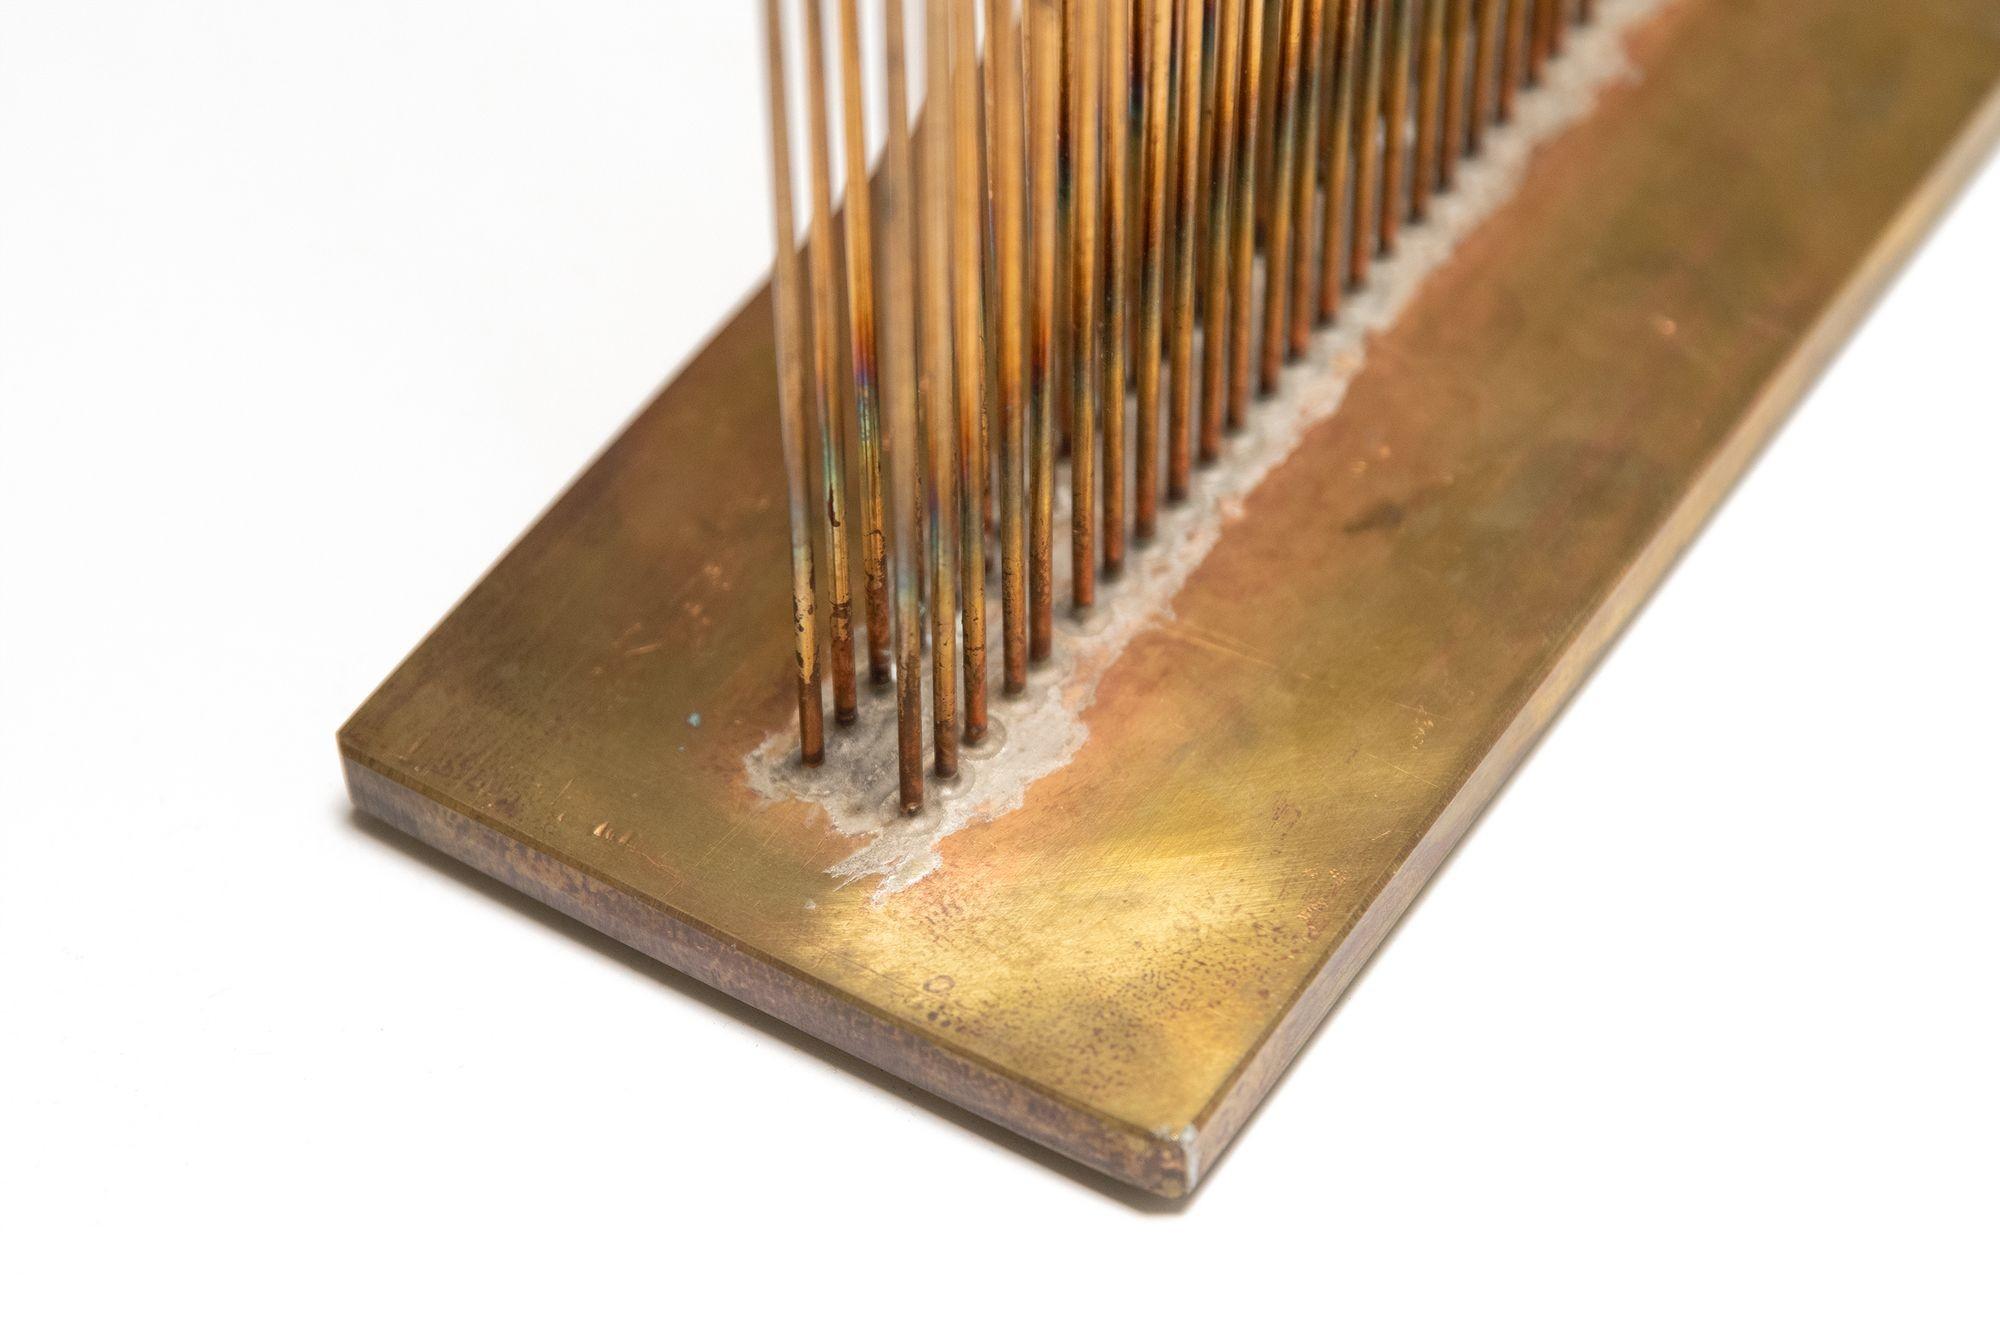 Silver Val Bertoia 'Sound of V' Sonambient Sculpture Silicon Bronze Rods in Brass Base For Sale